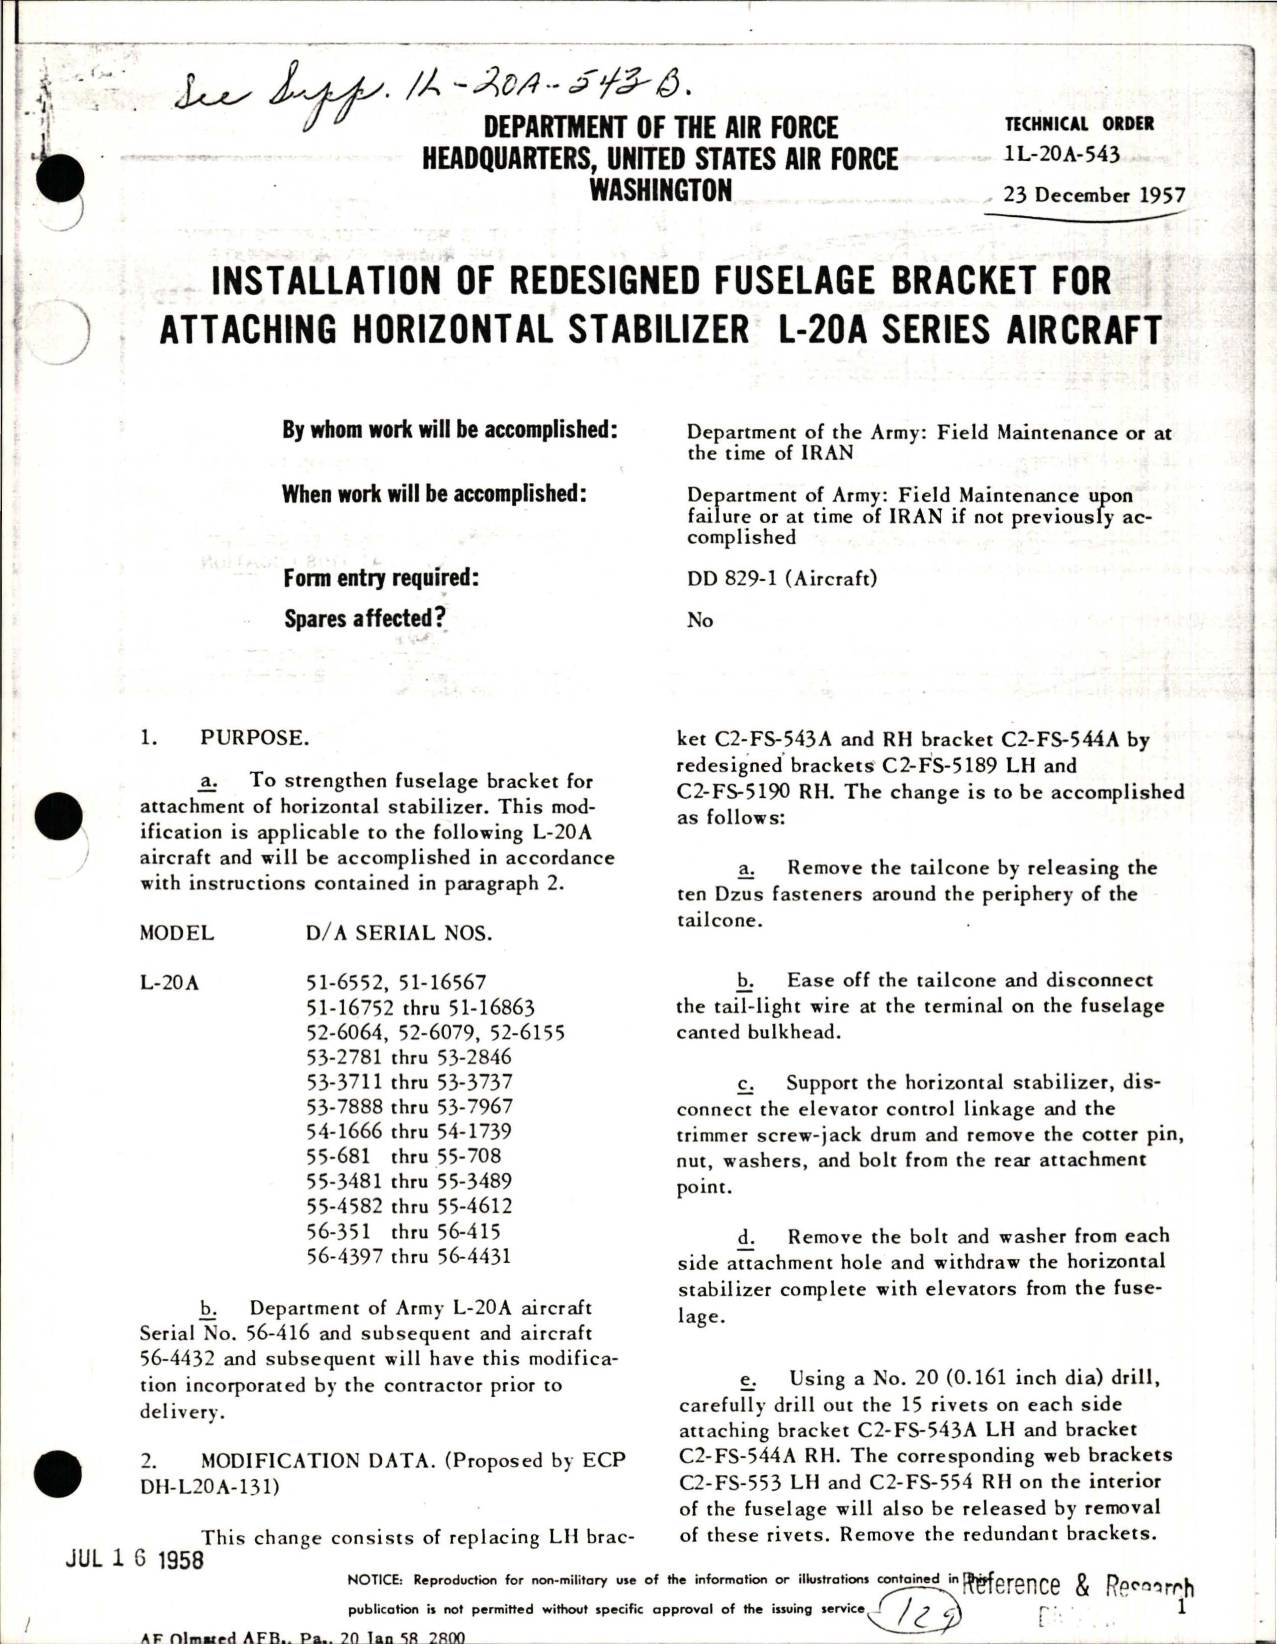 Sample page 1 from AirCorps Library document: Installation of Redesigned Fuselage Bracket for Attaching Horizontal Stabilizer - L-20A Series